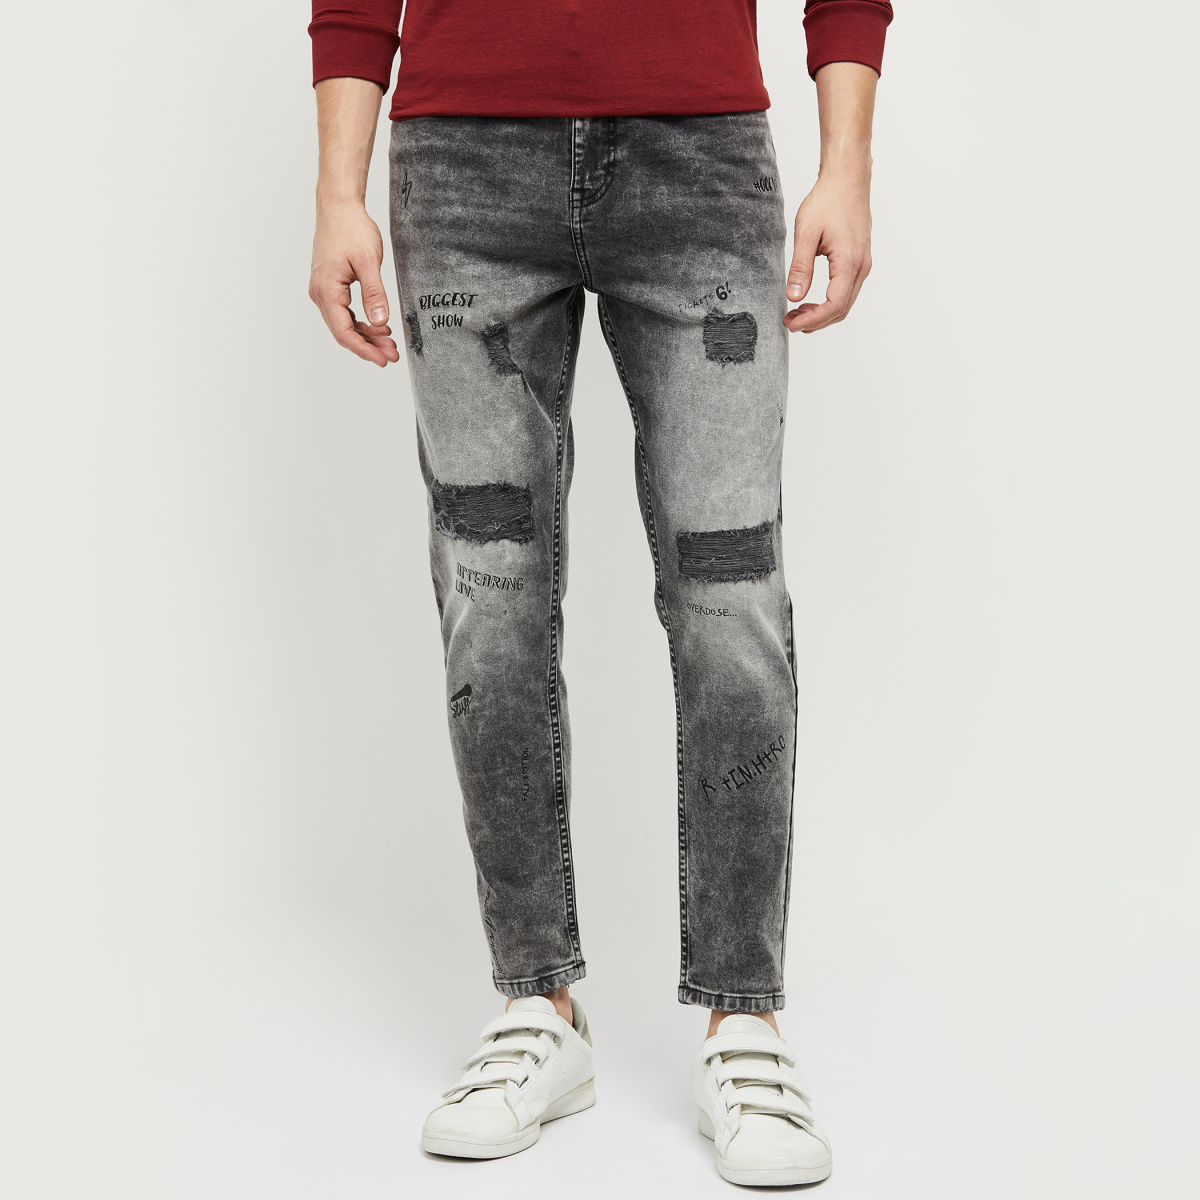 MAX Stonewashed Carrot Fit Jeans